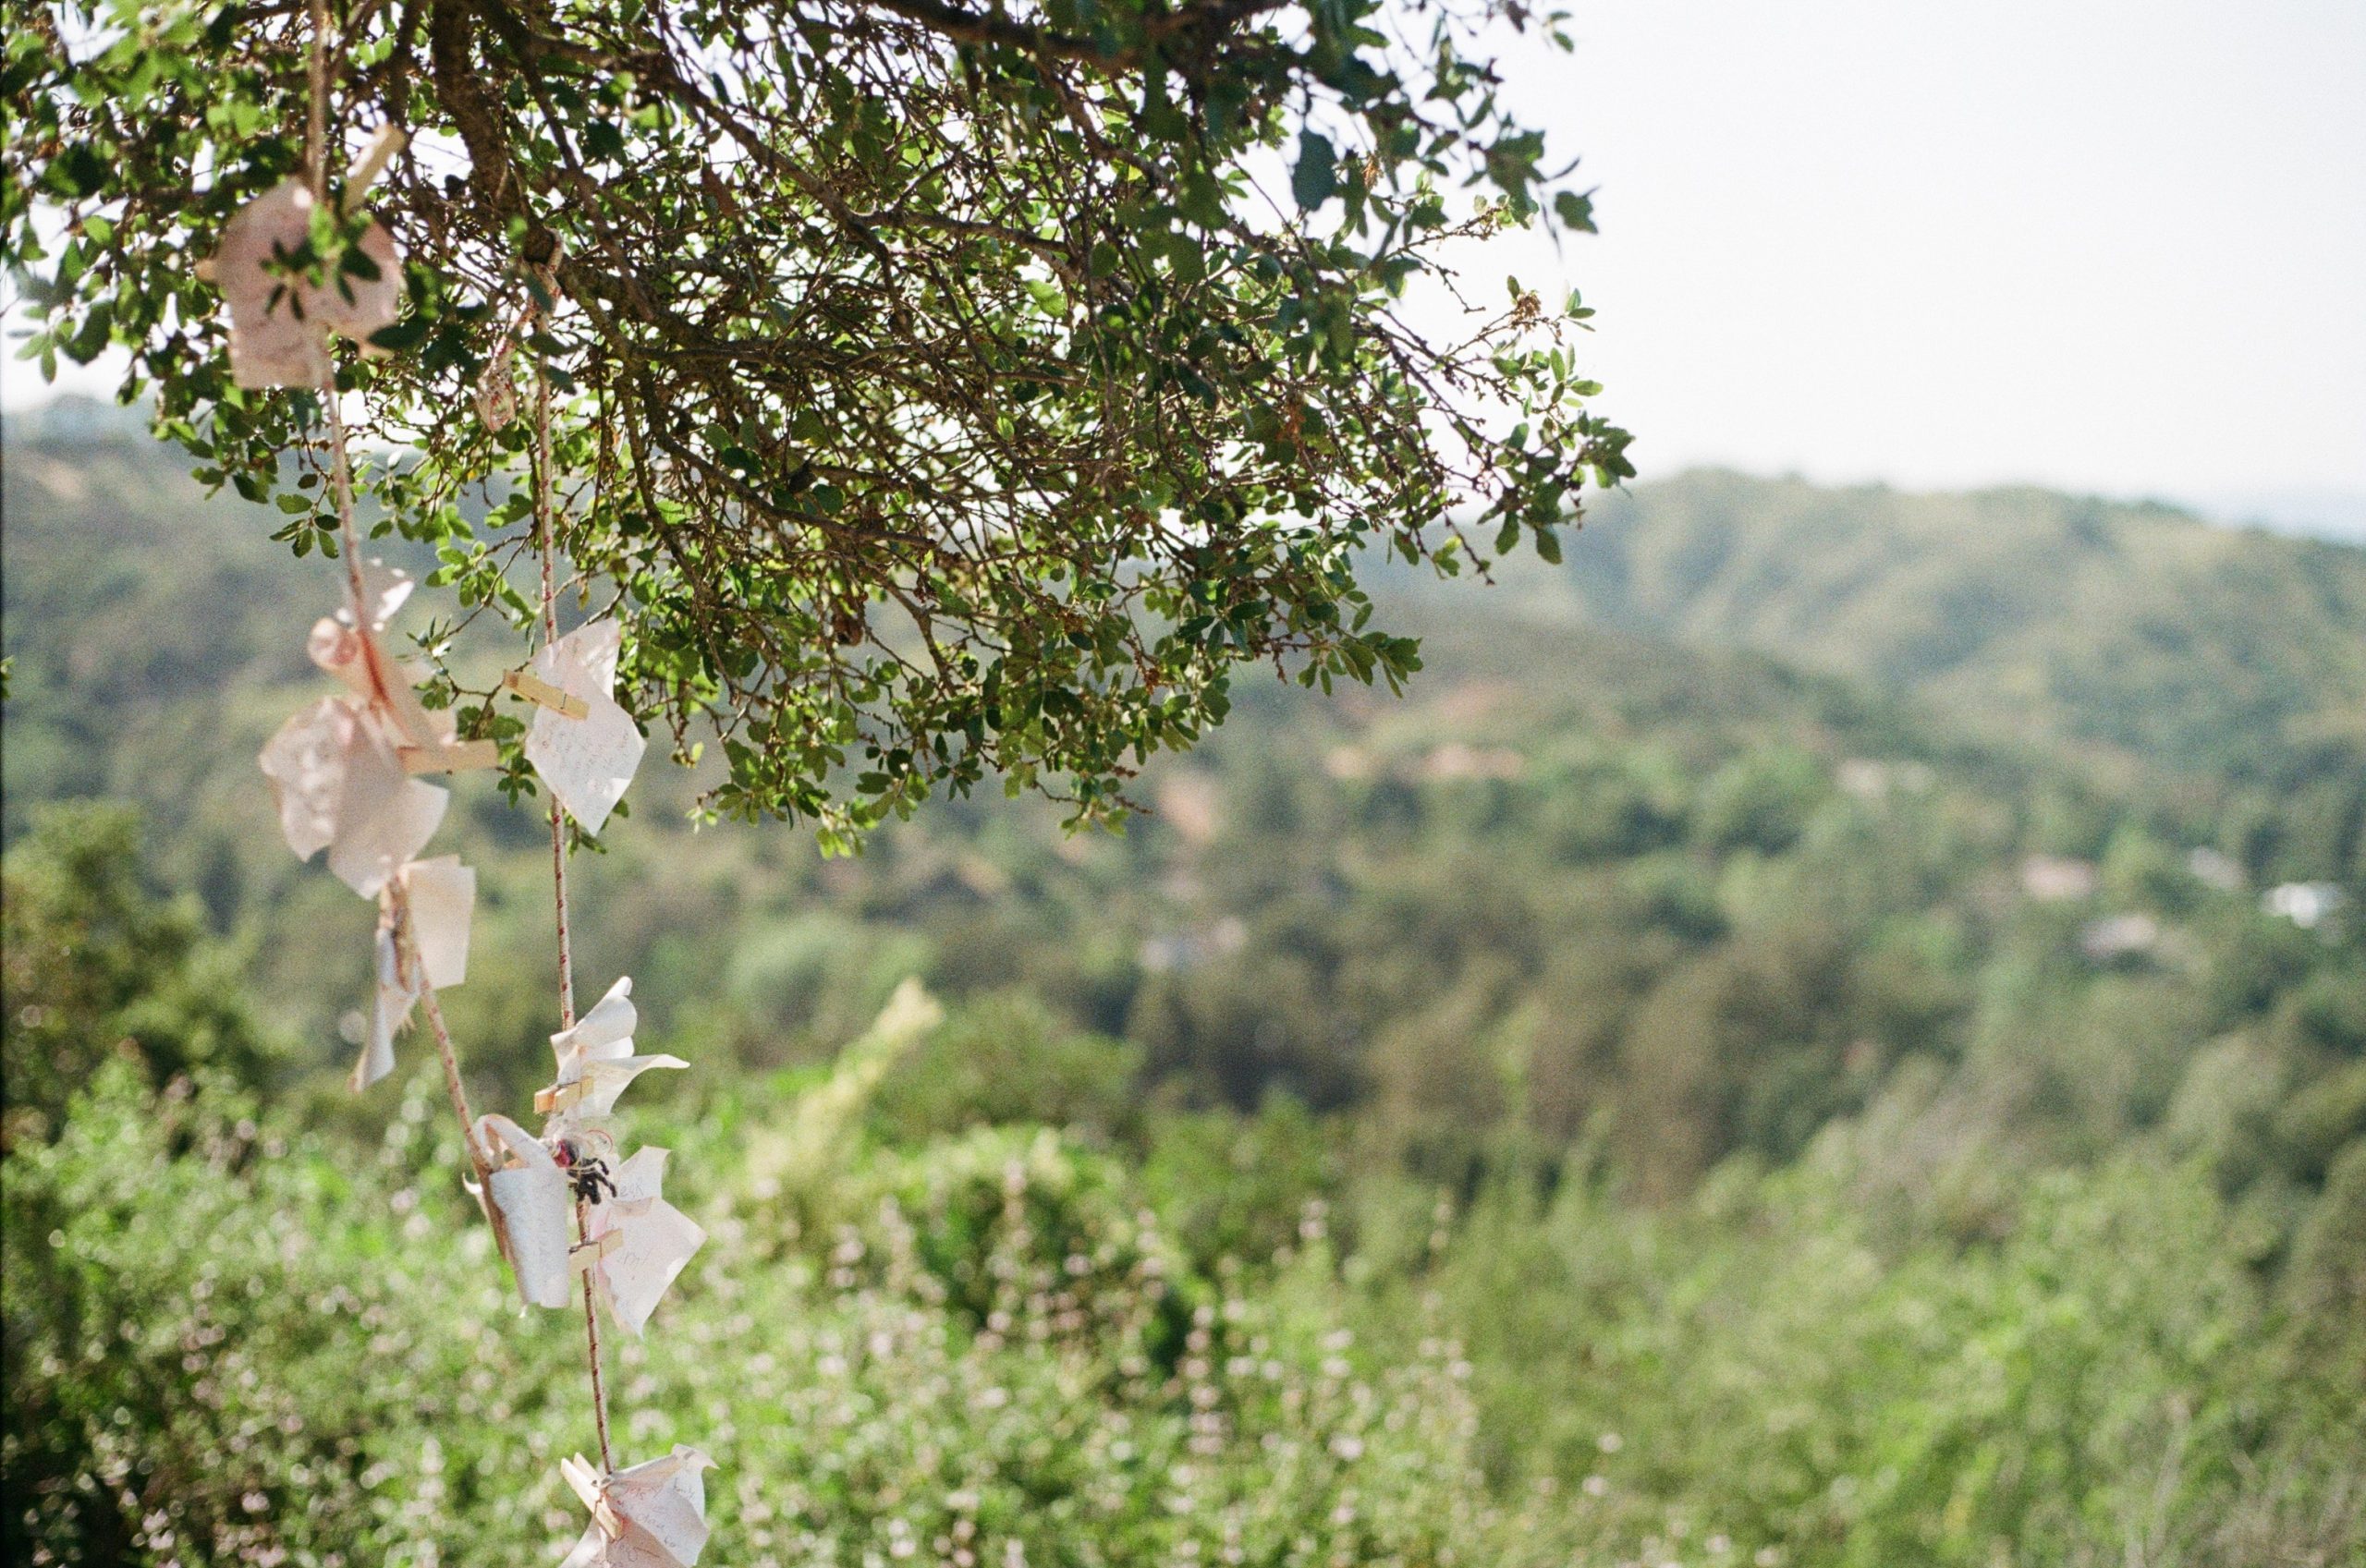 photo of a grassy landscape in Los Angeles, focused on small white flowers blooming under a hanging tree branch